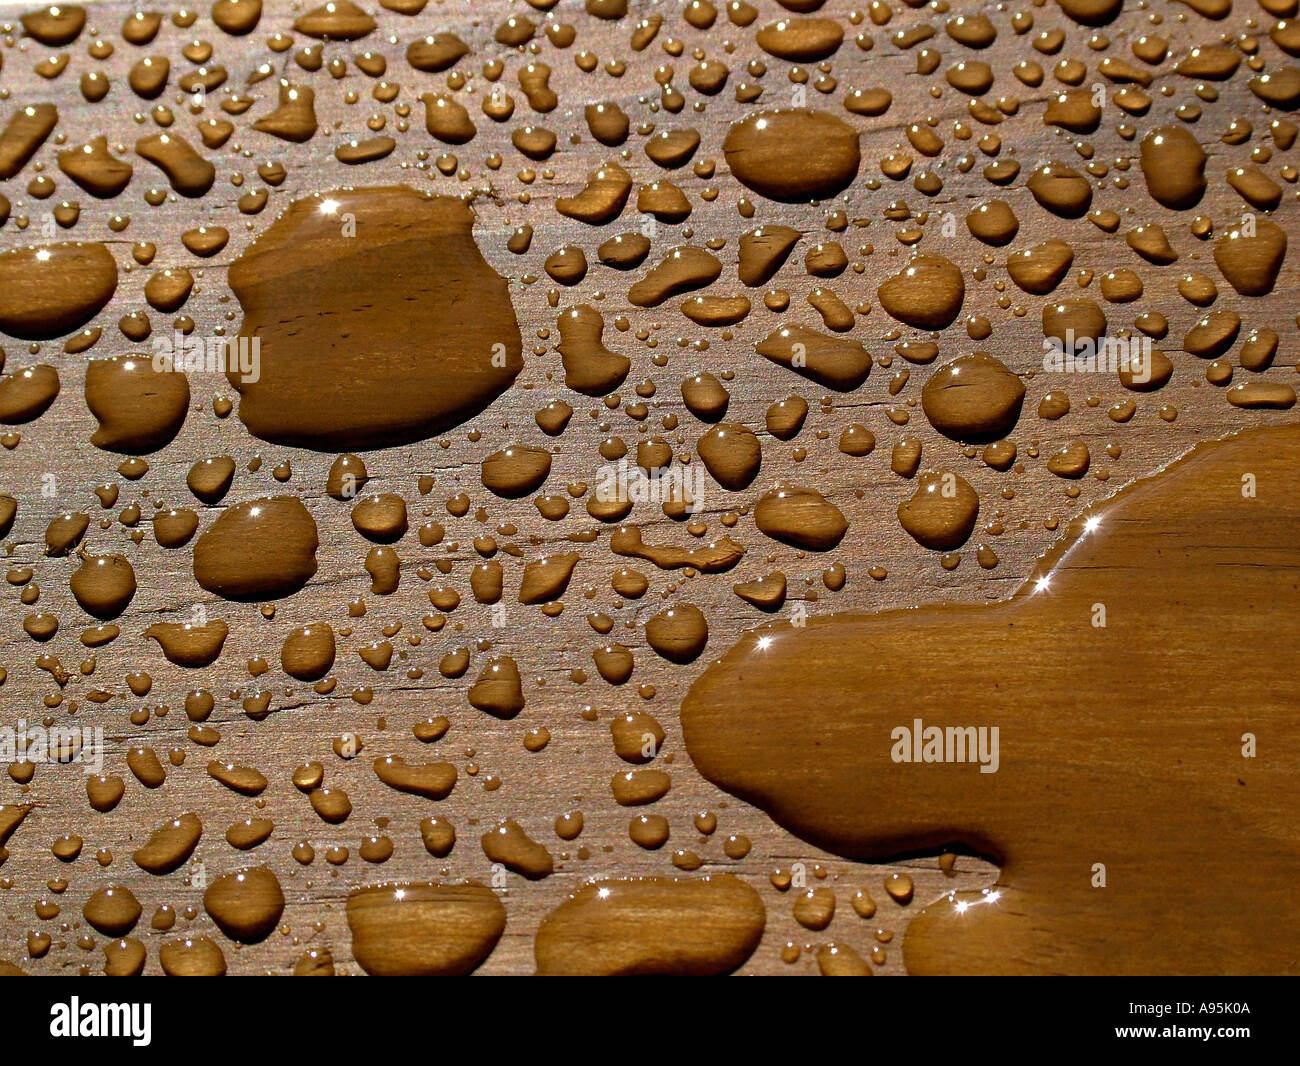 Texture of light wood strips with small water droplets. Stock Photo by  wirestock